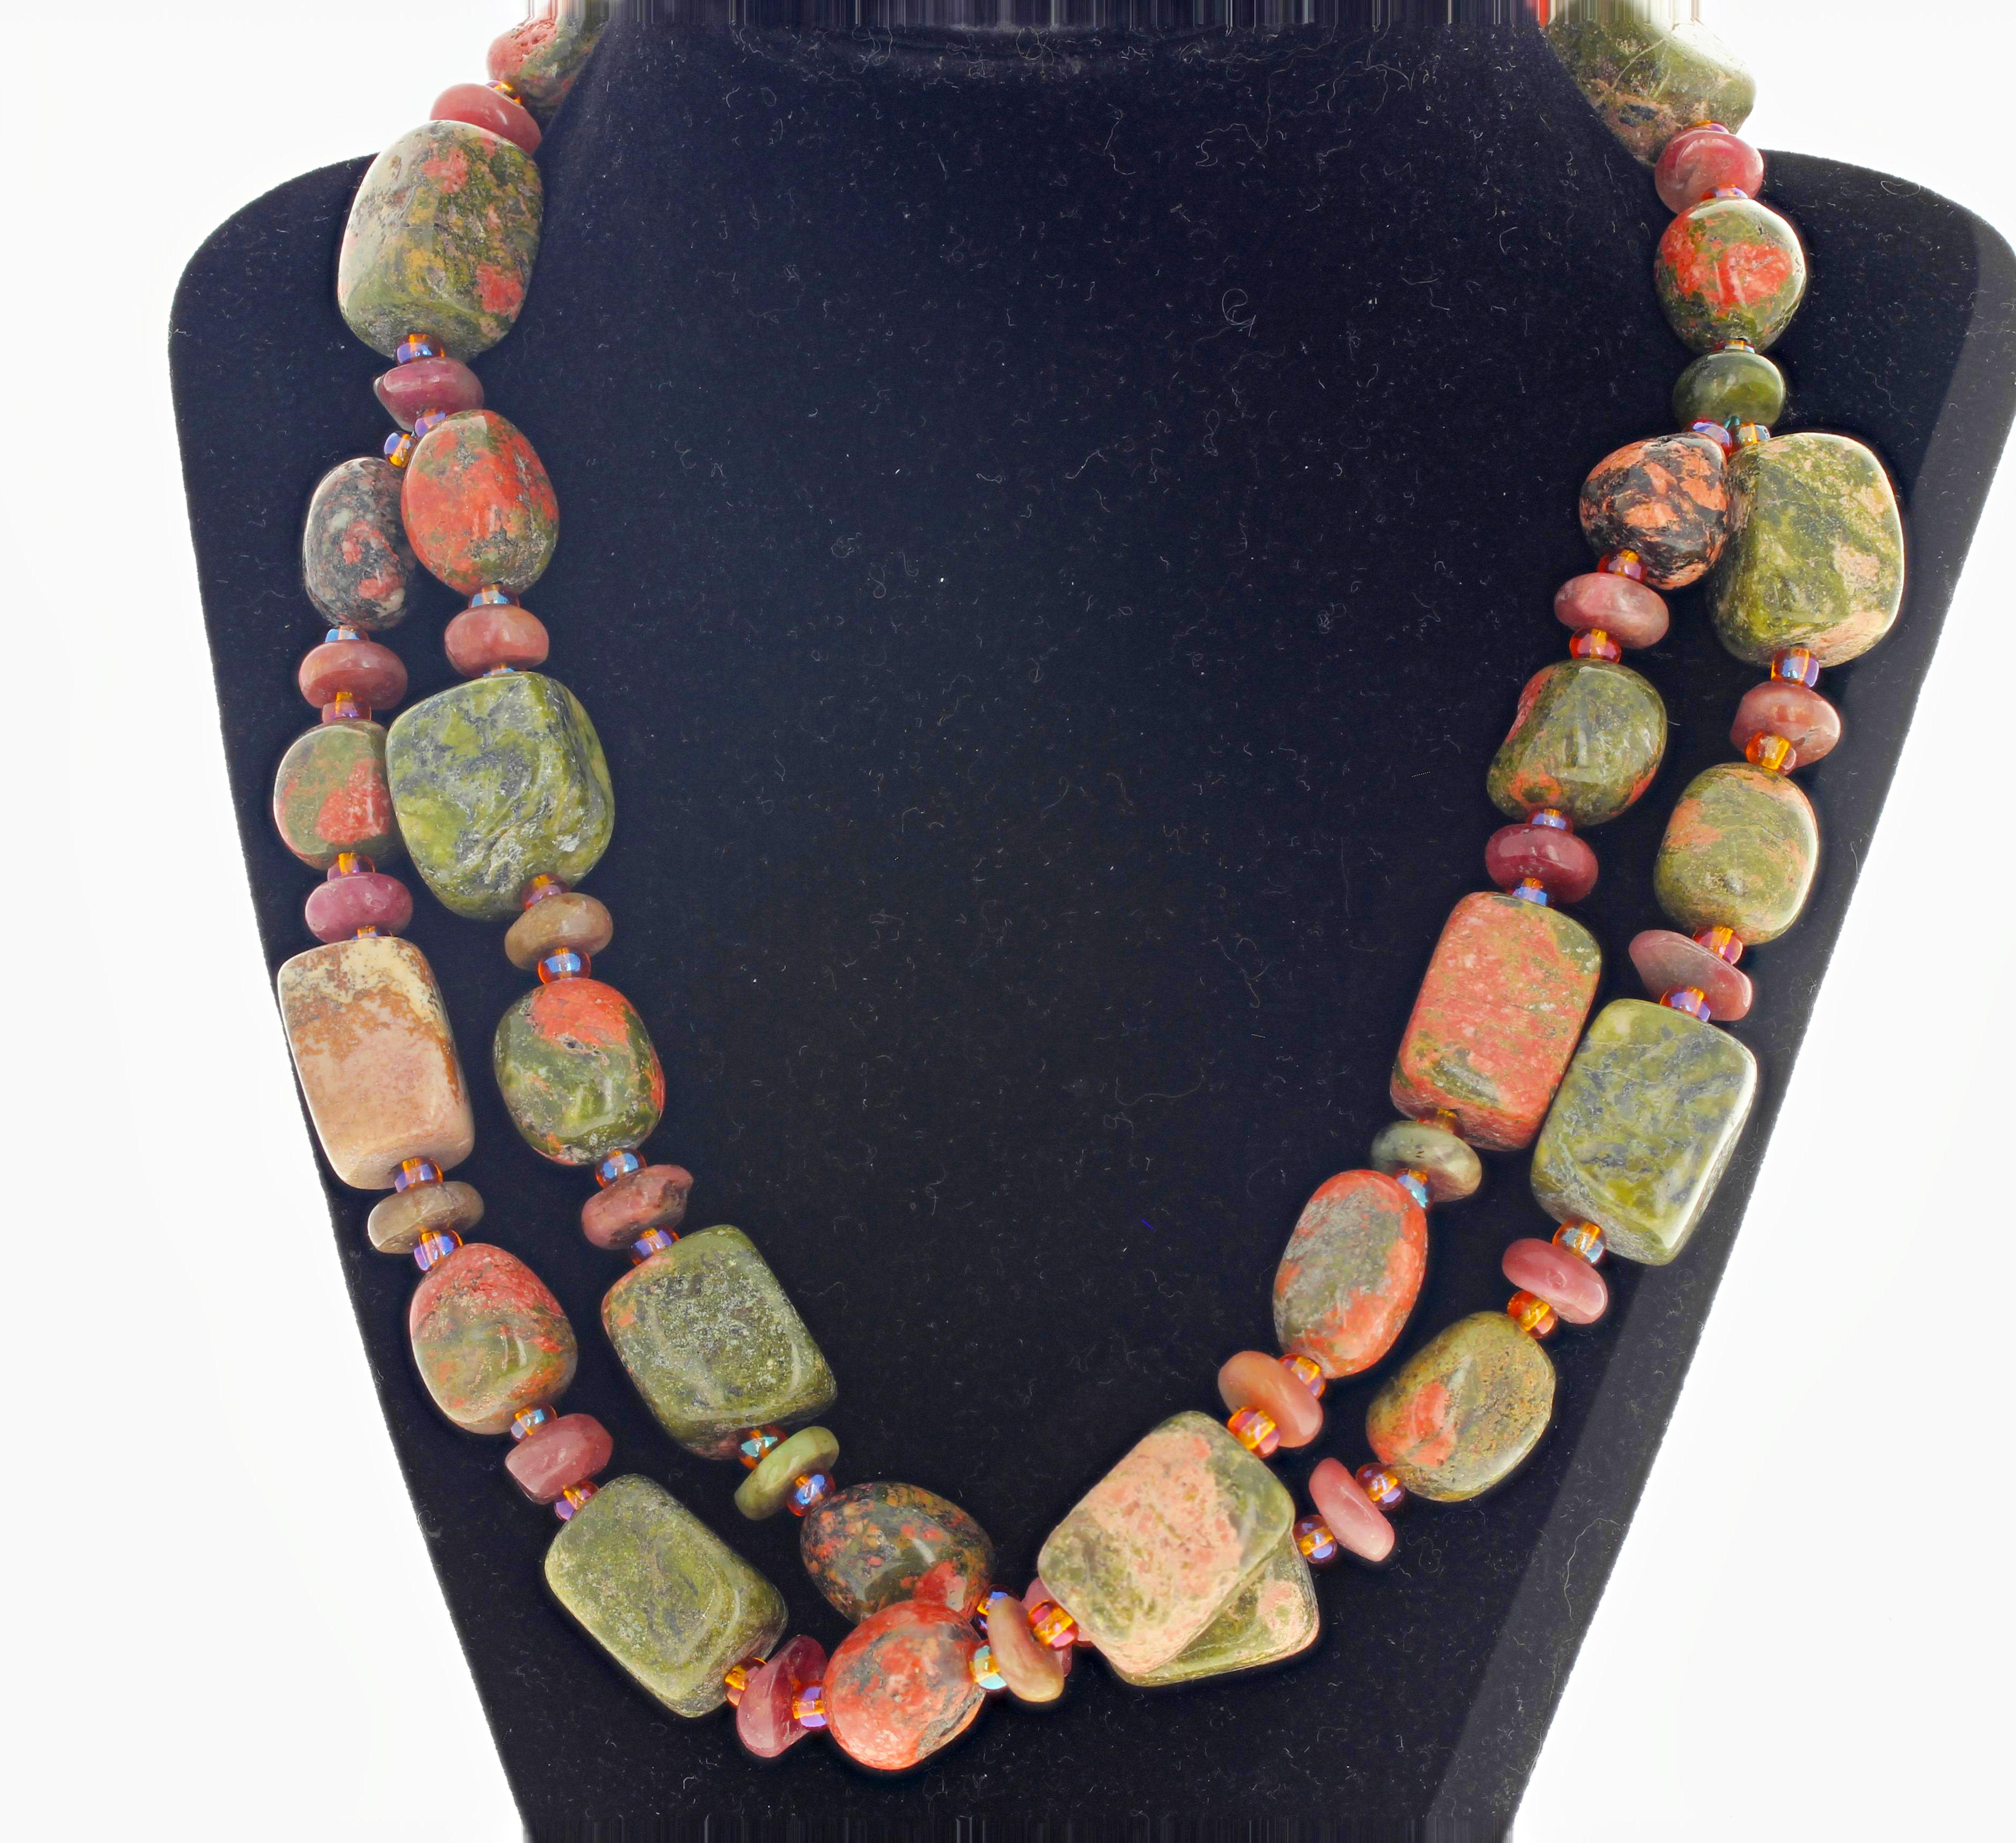 Highly polished glowing Unakite Jasper enhanced with polished rondels of pnky Tourmaline sits elegantly on your neck with an easy to use hook clasp.  The necklace is 19.5 inches long and the largest Jasper is approximately 20 mm x 15 mm.  Unakite